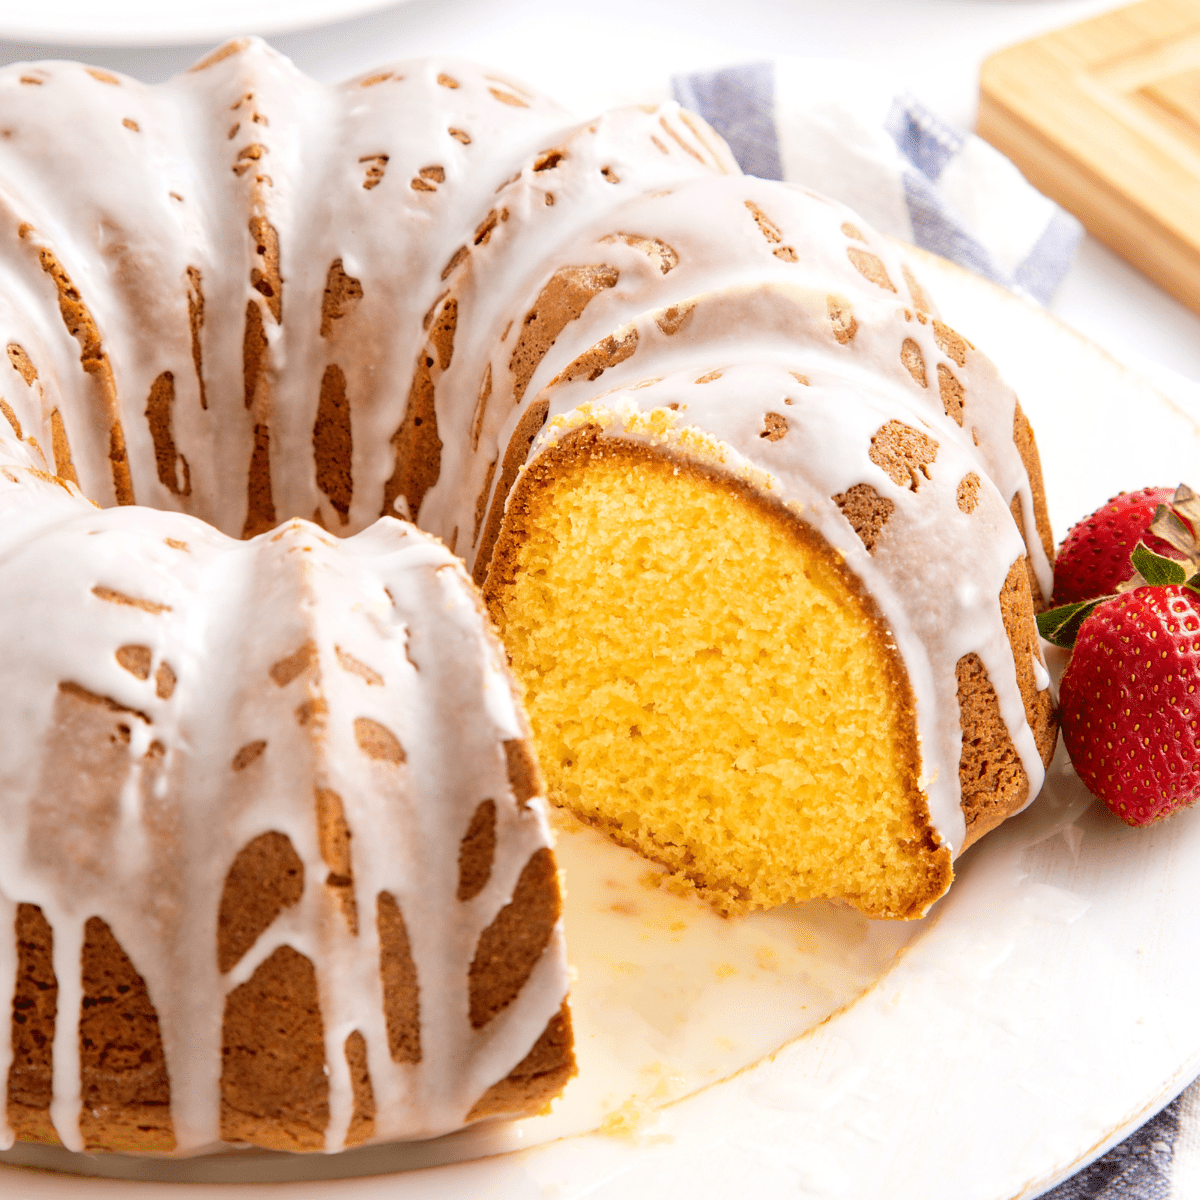 https://www.allthingsmamma.com/wp-content/uploads/2023/04/Pound-Cake-from-Cake-Mix-Featured-Image.png